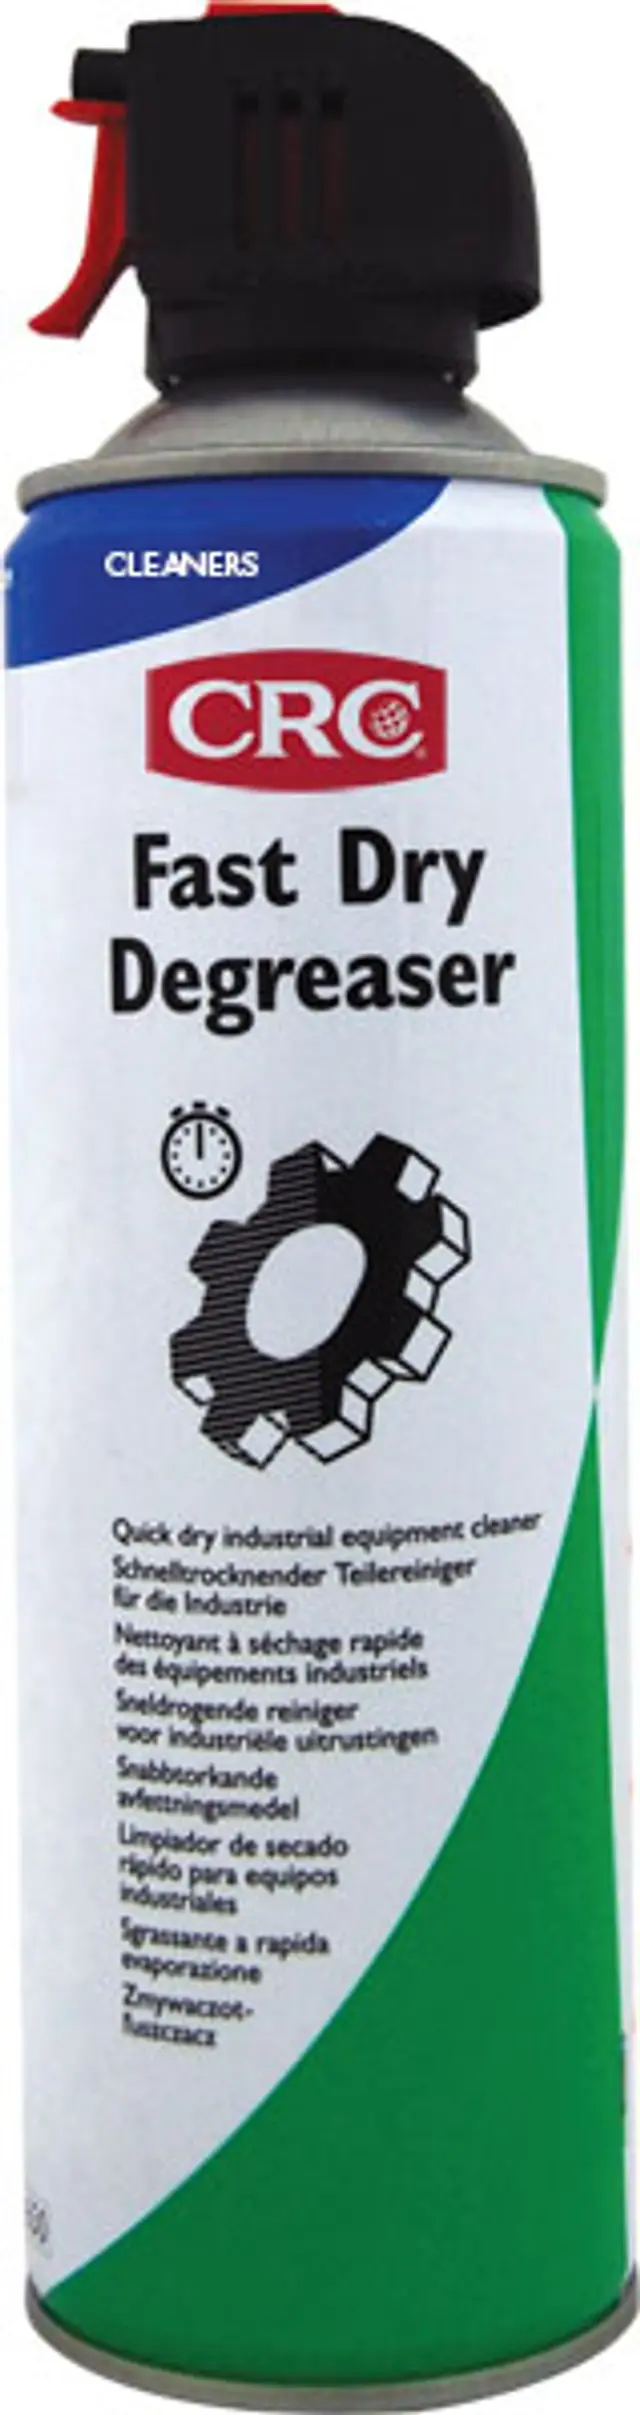 CRC FAST DRY DEGREASER